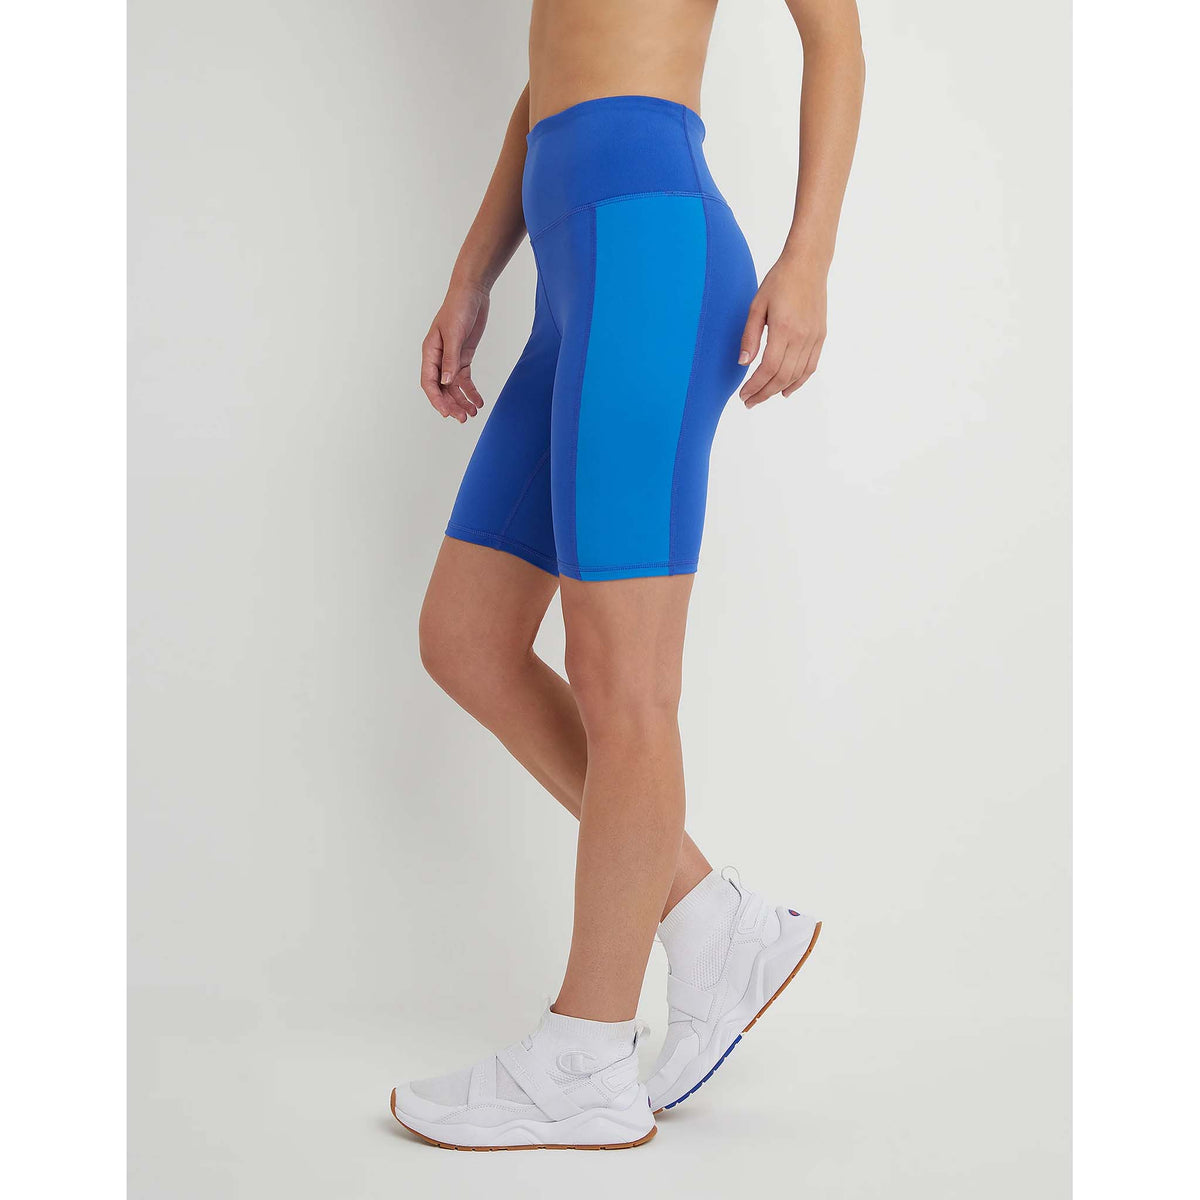 Champion Absolute Eco Bike Short de style cuissard femme deep dazzling blue lateral